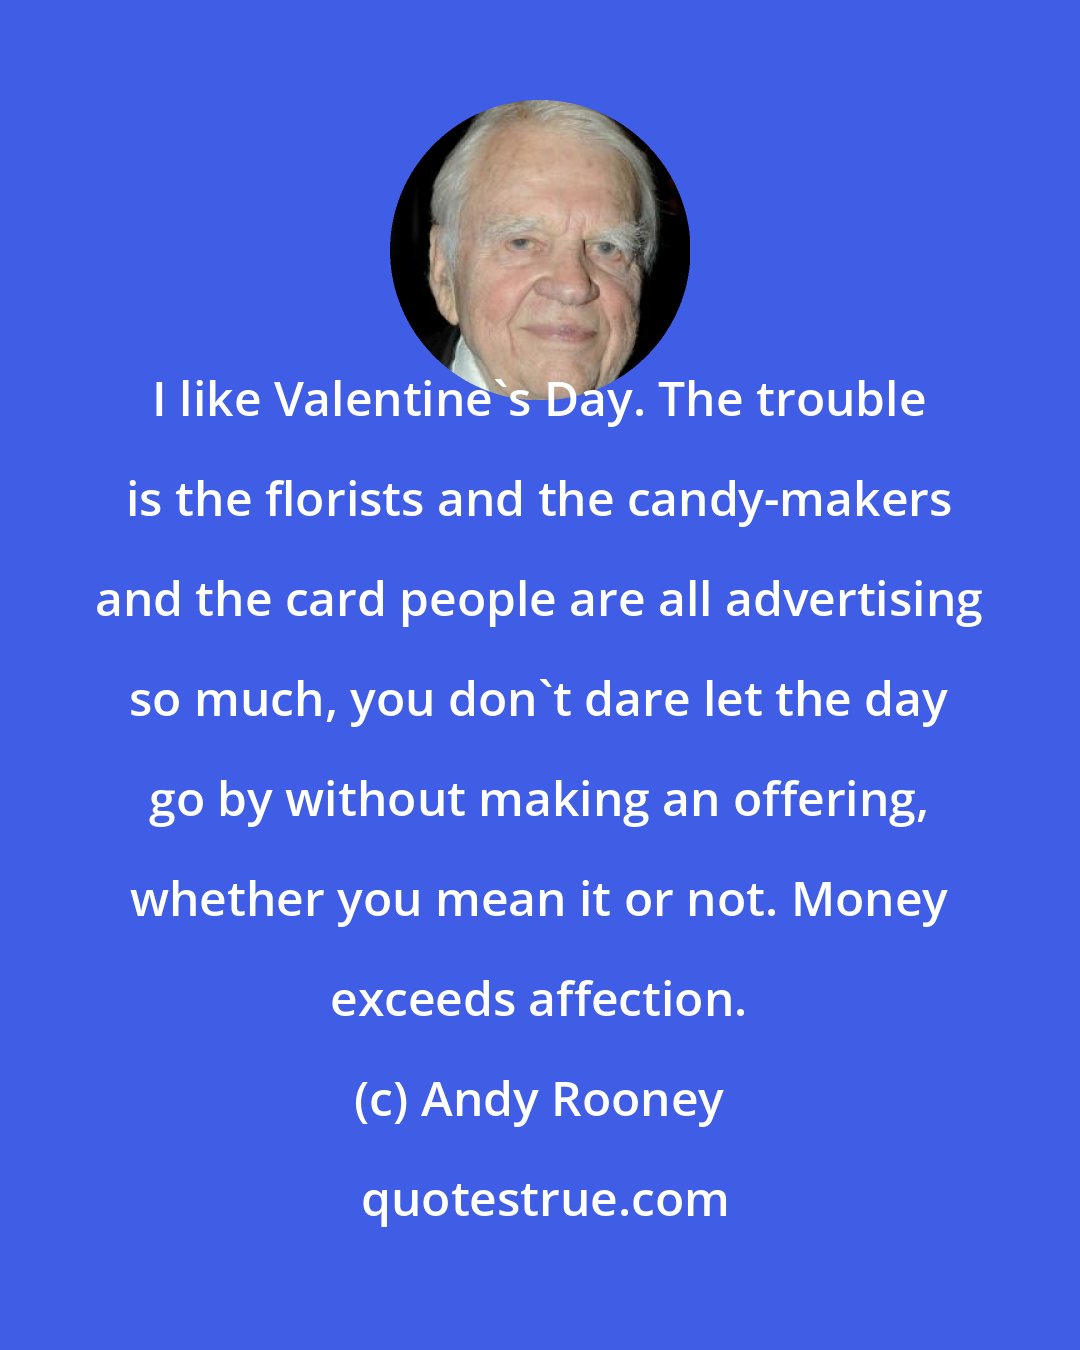 Andy Rooney: I like Valentine's Day. The trouble is the florists and the candy-makers and the card people are all advertising so much, you don't dare let the day go by without making an offering, whether you mean it or not. Money exceeds affection.